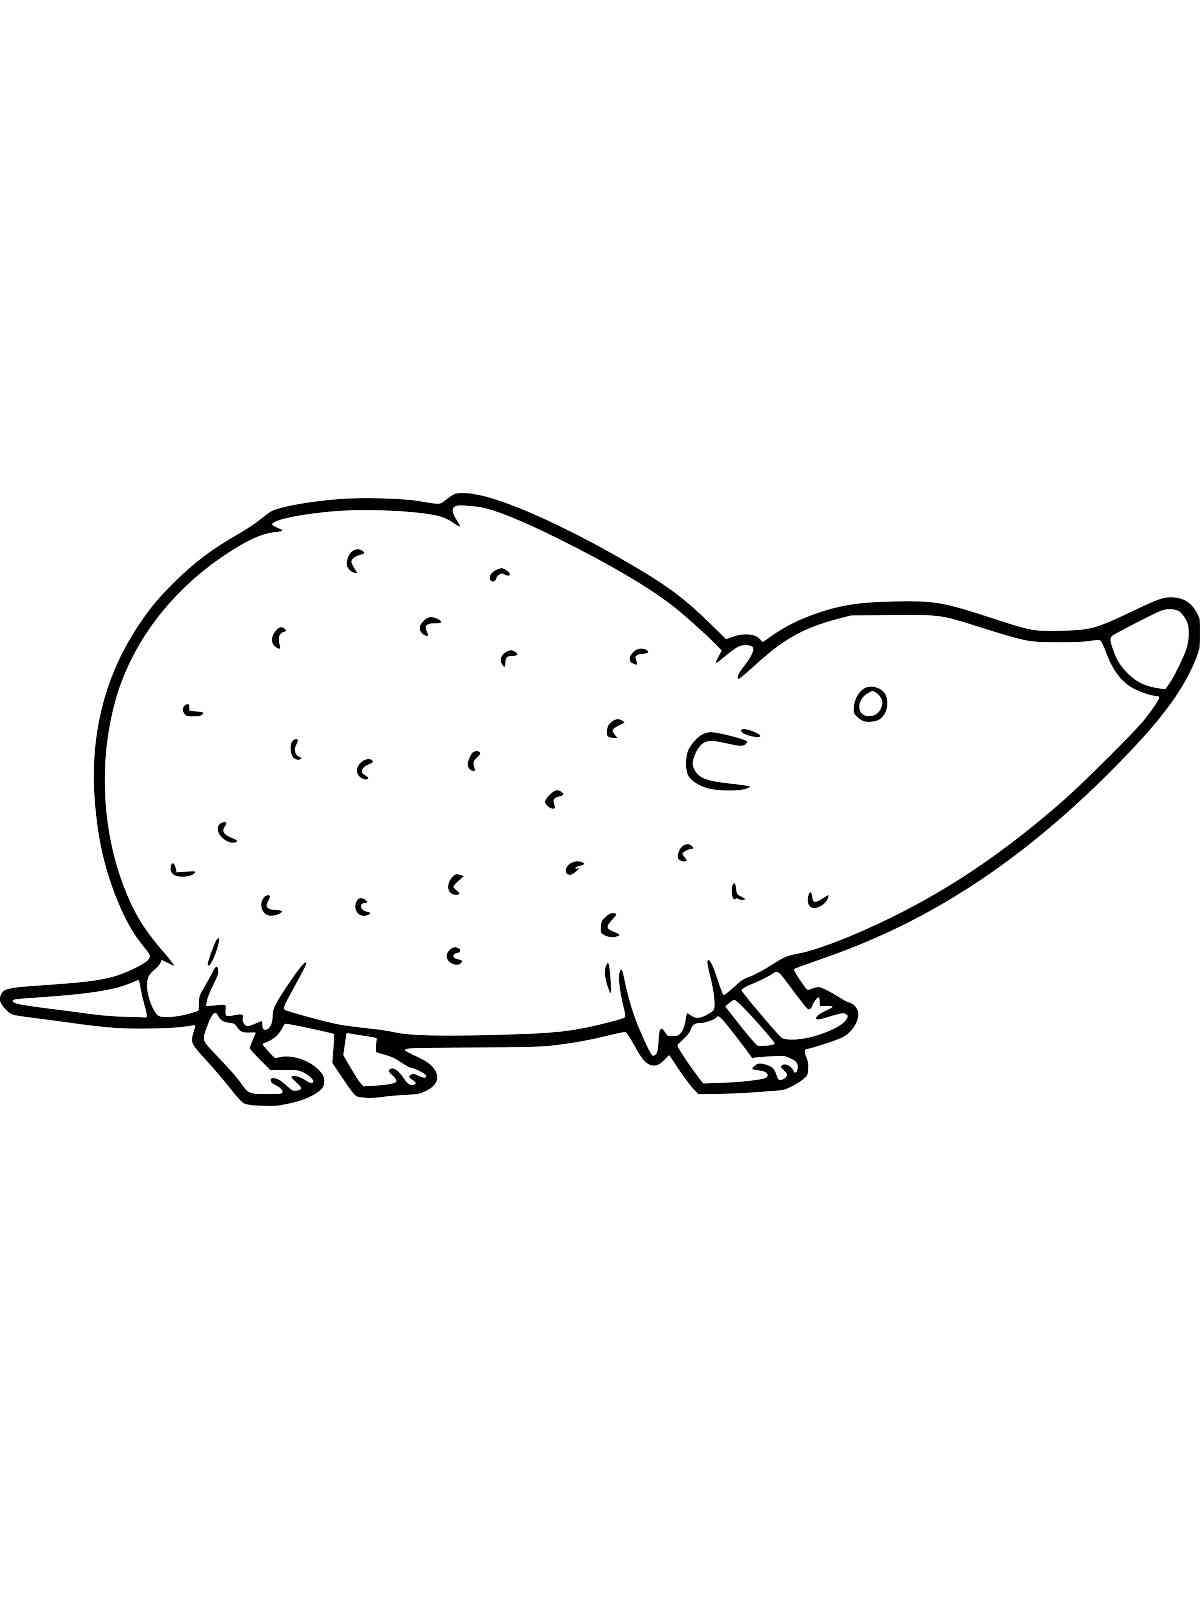 Easy Shrew coloring page